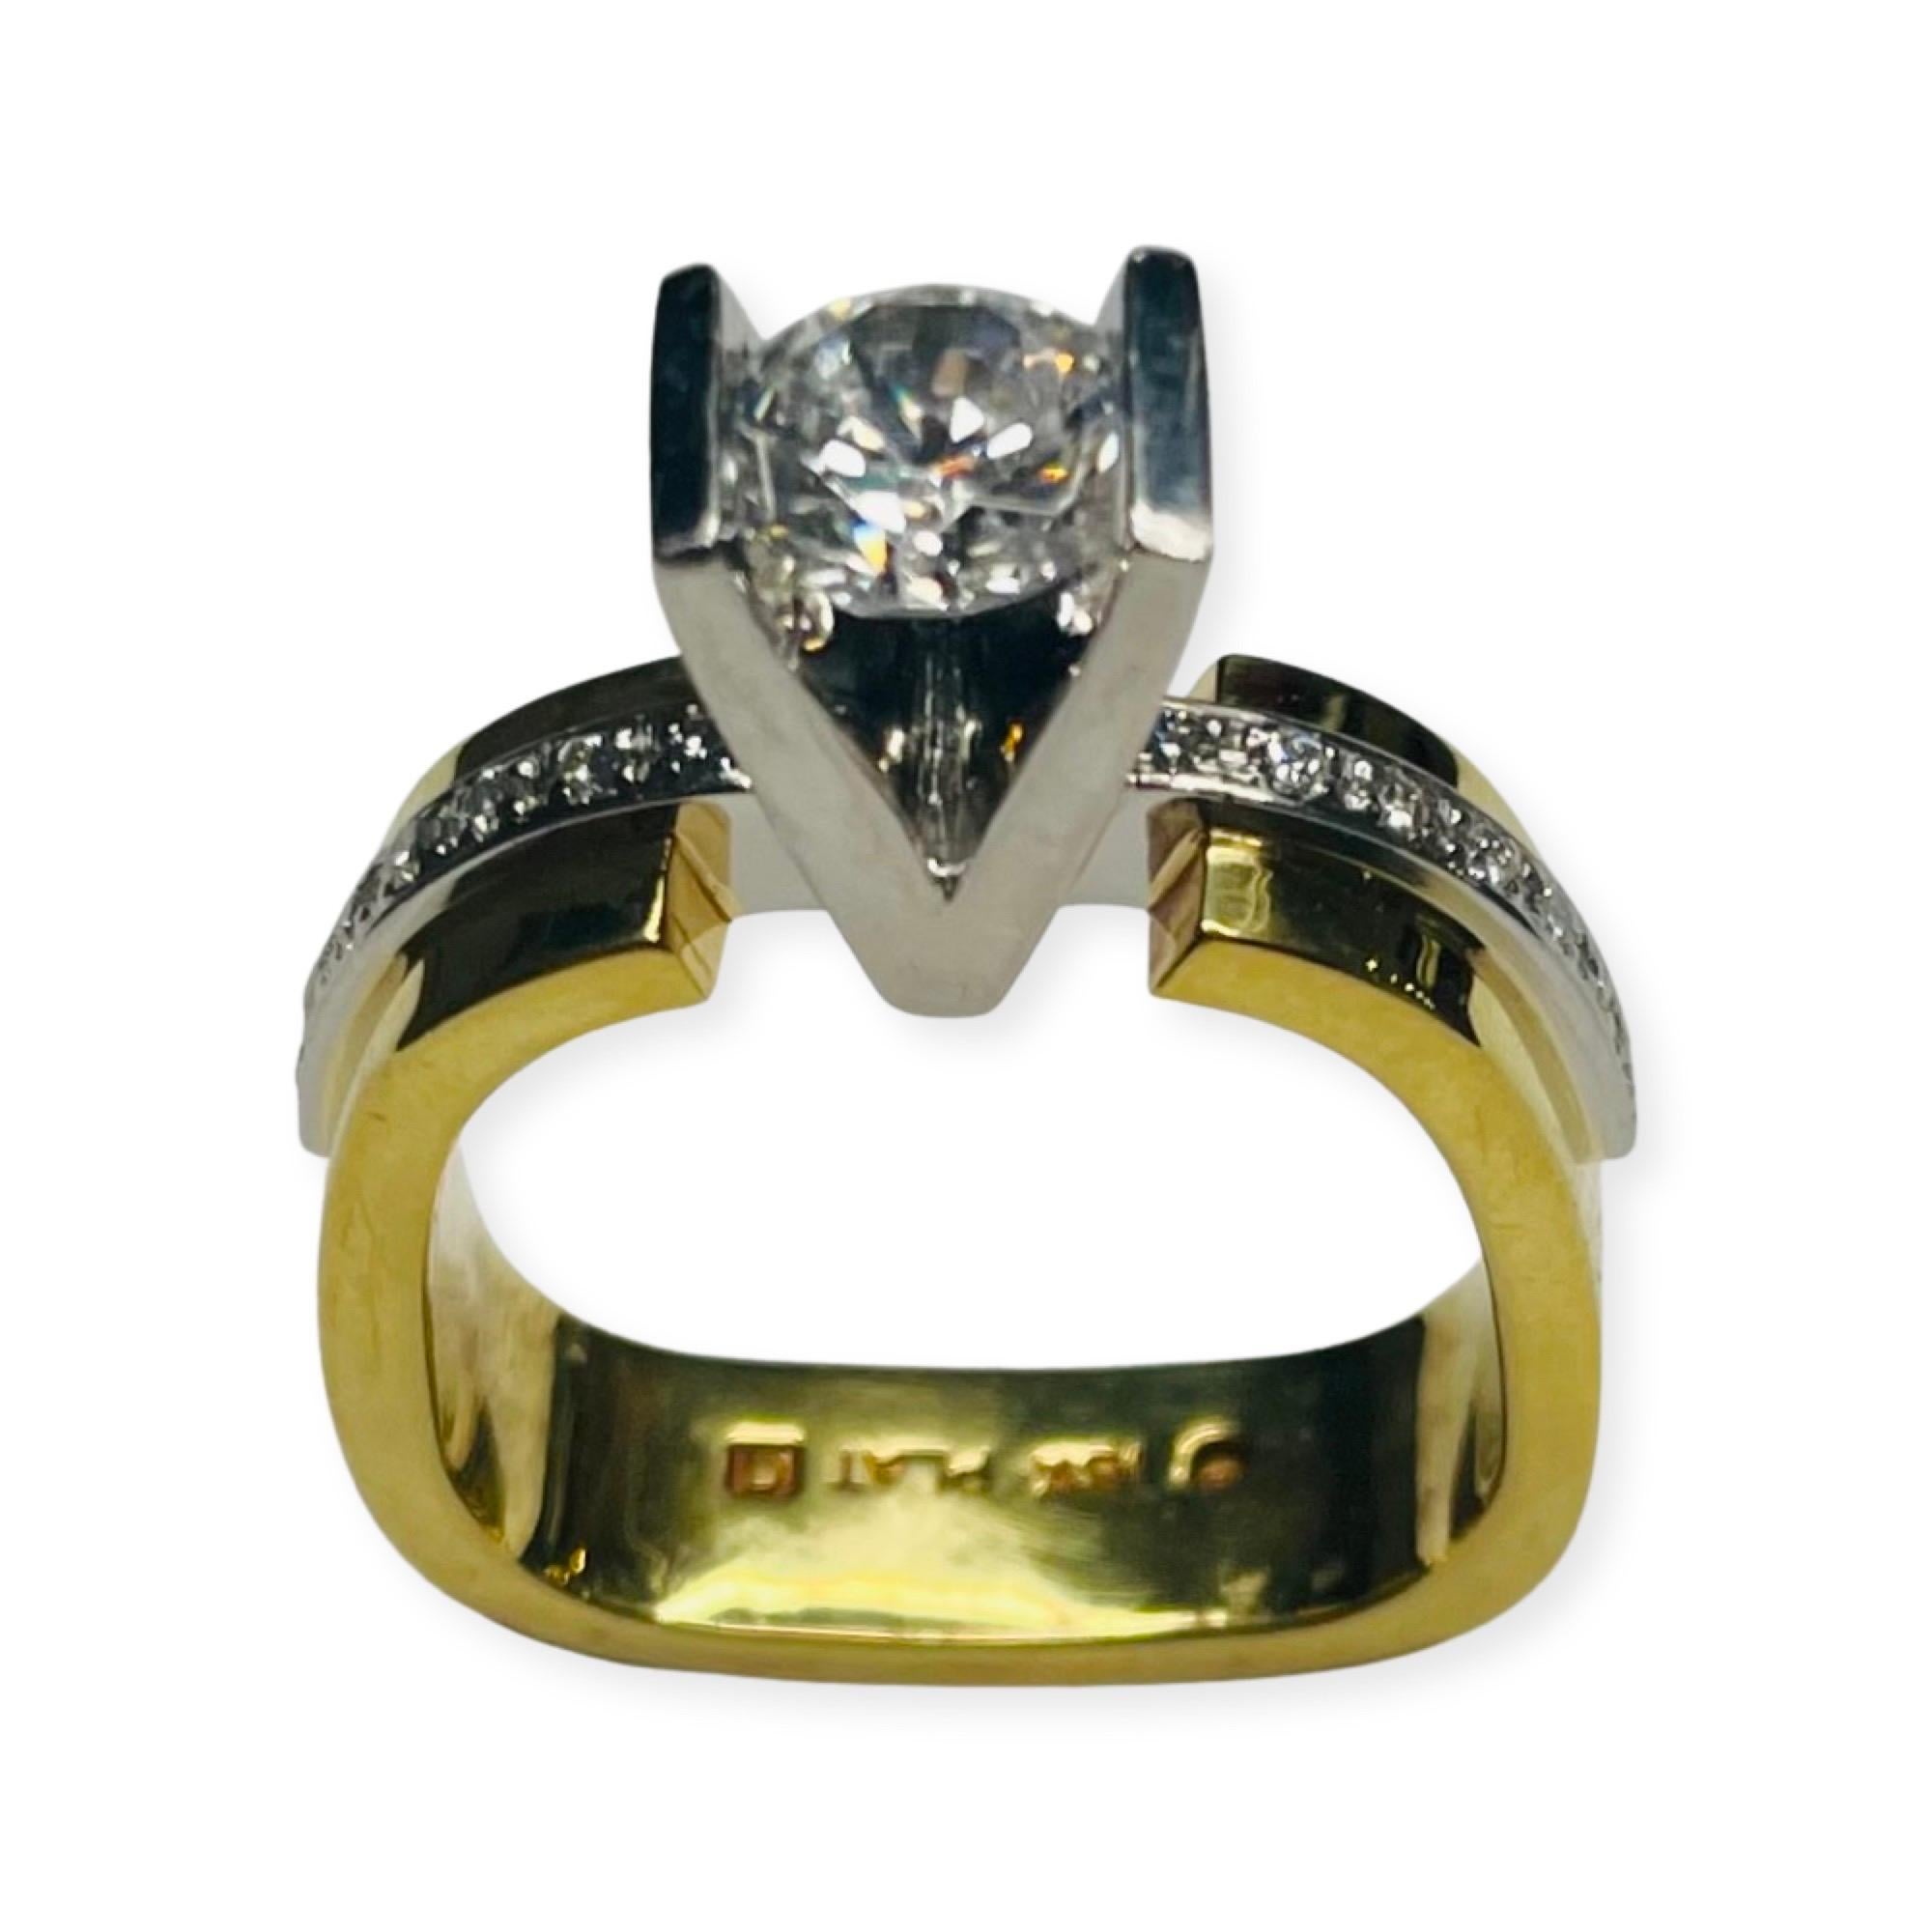 Eddie Sakamoto 18K yellow gold, Platinum and Diamond Ring. The center is a channel set Cubic Zirconia. It is equivalent in size to a 6.5mm or 1.0 carat diamond. It can be replaced with a colored stone, moissonite, lab created or natural diamond for